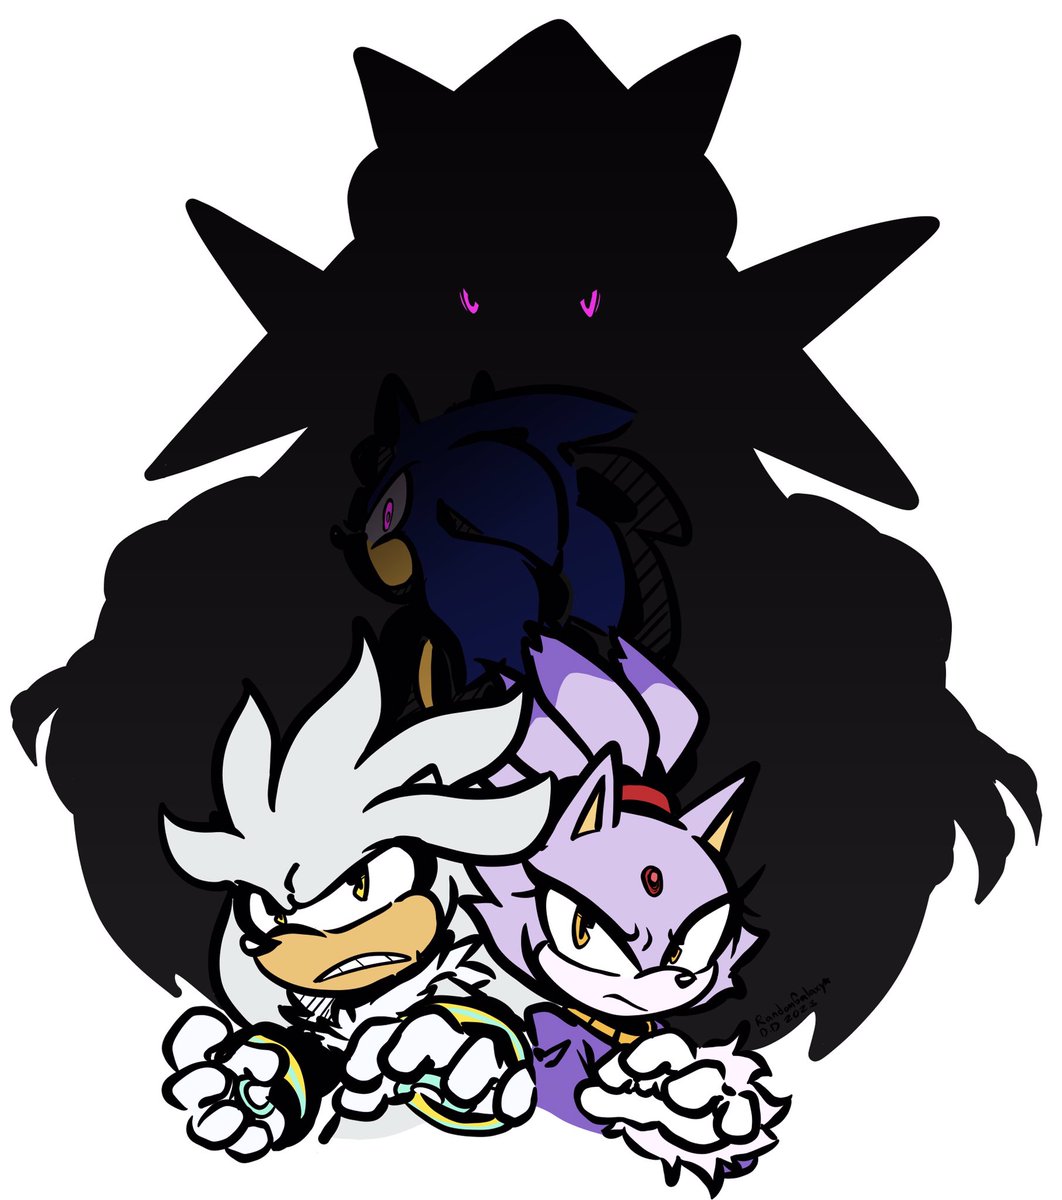 A quick drawing I did for @Steel_Plated200 Overlord au yippeeee #SonicTheHedgehog #sonicau